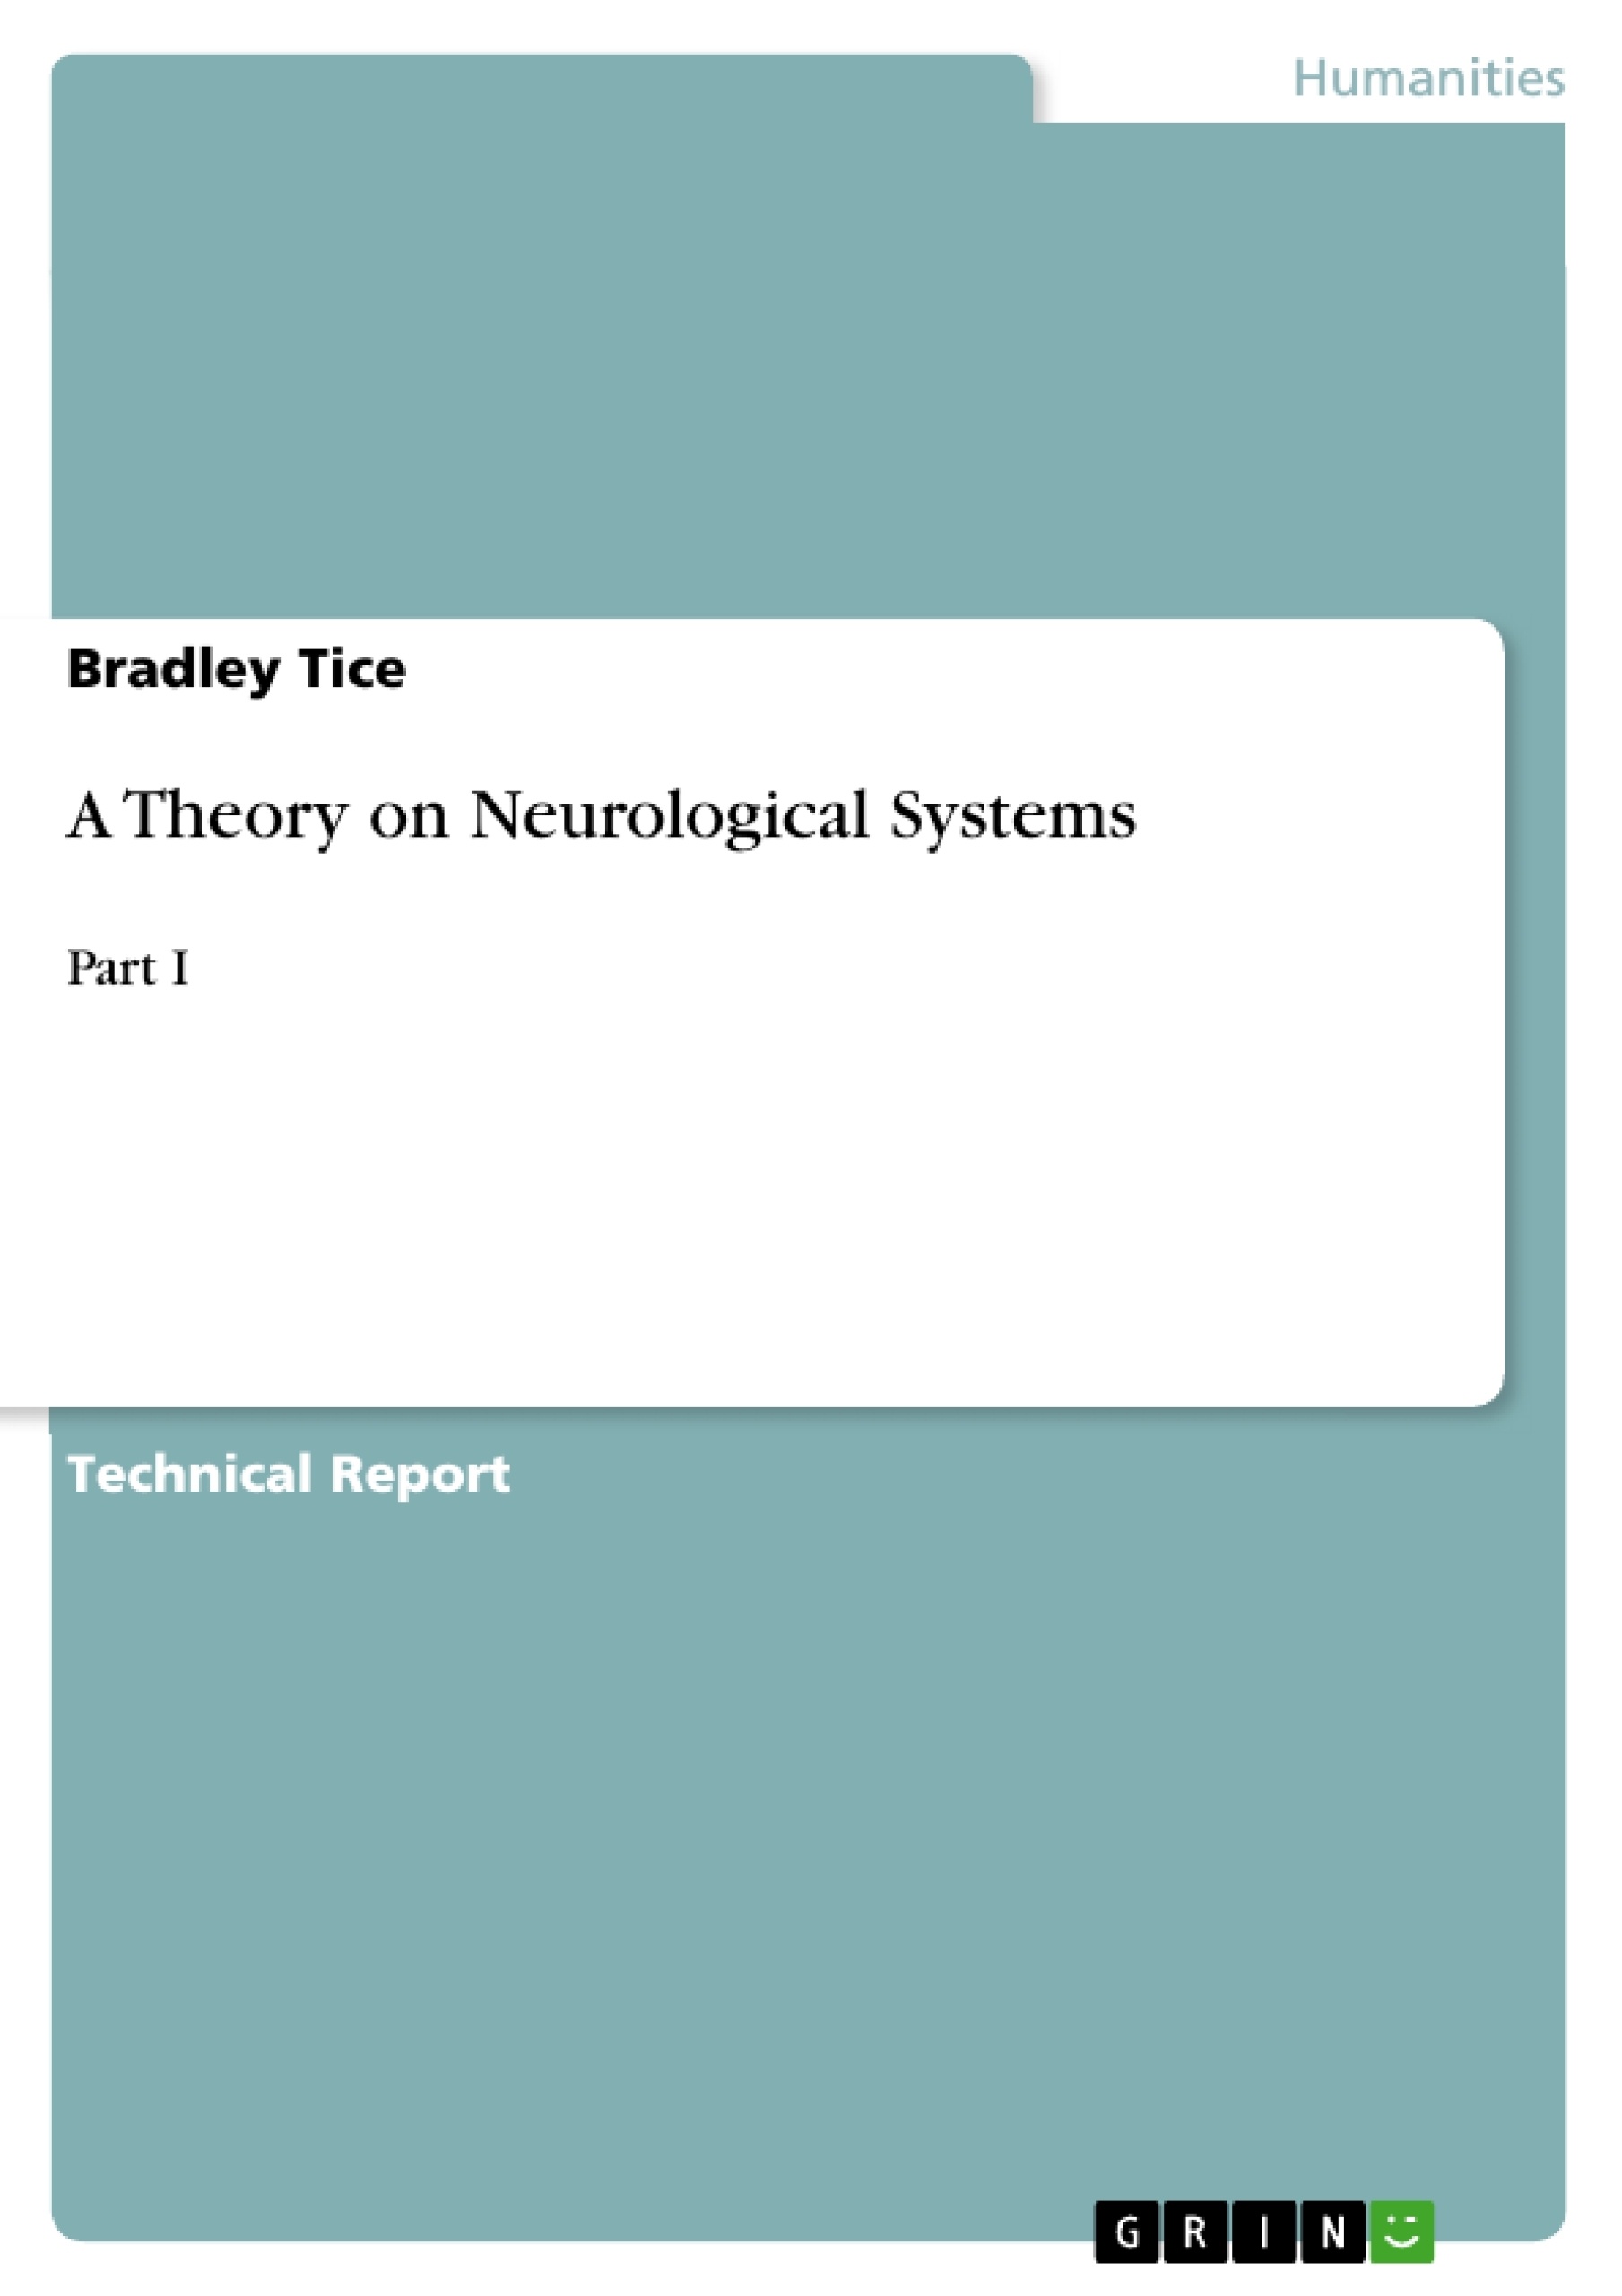 Title: A Theory on Neurological Systems